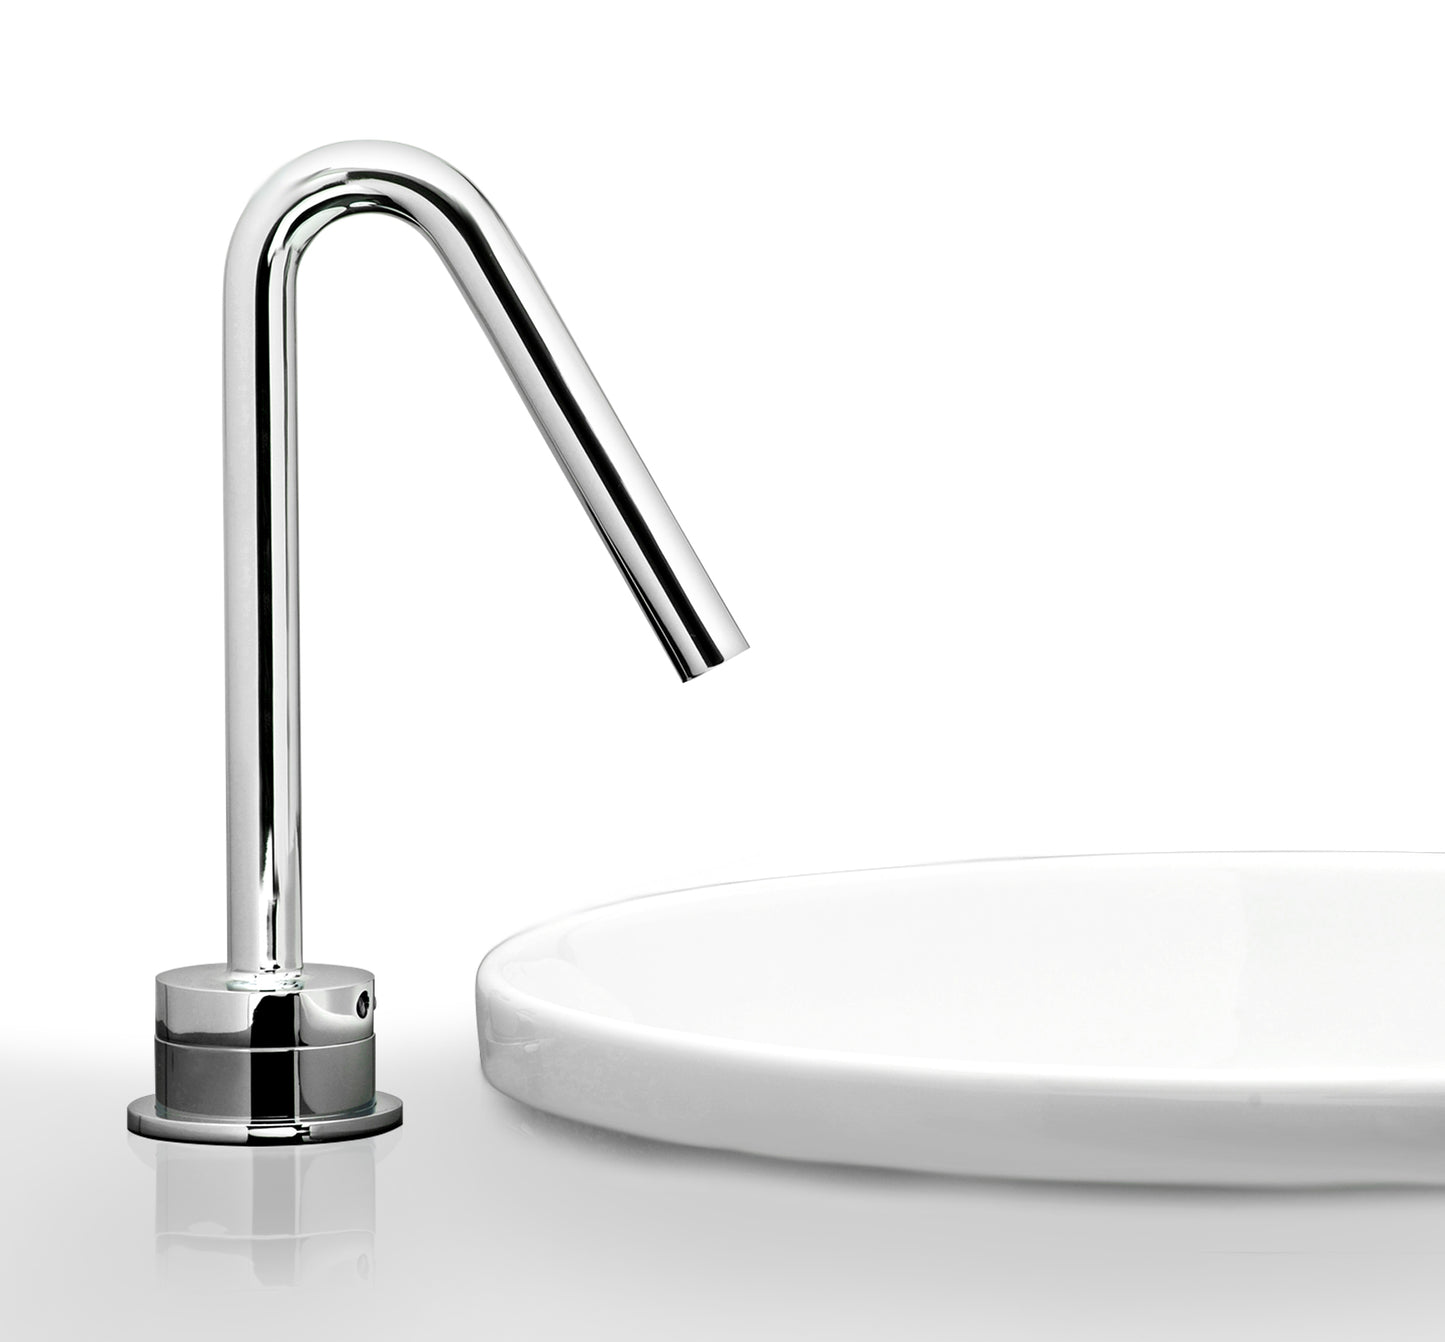 Hands Free Automatic Faucet for 1 Inch Vessel Sink